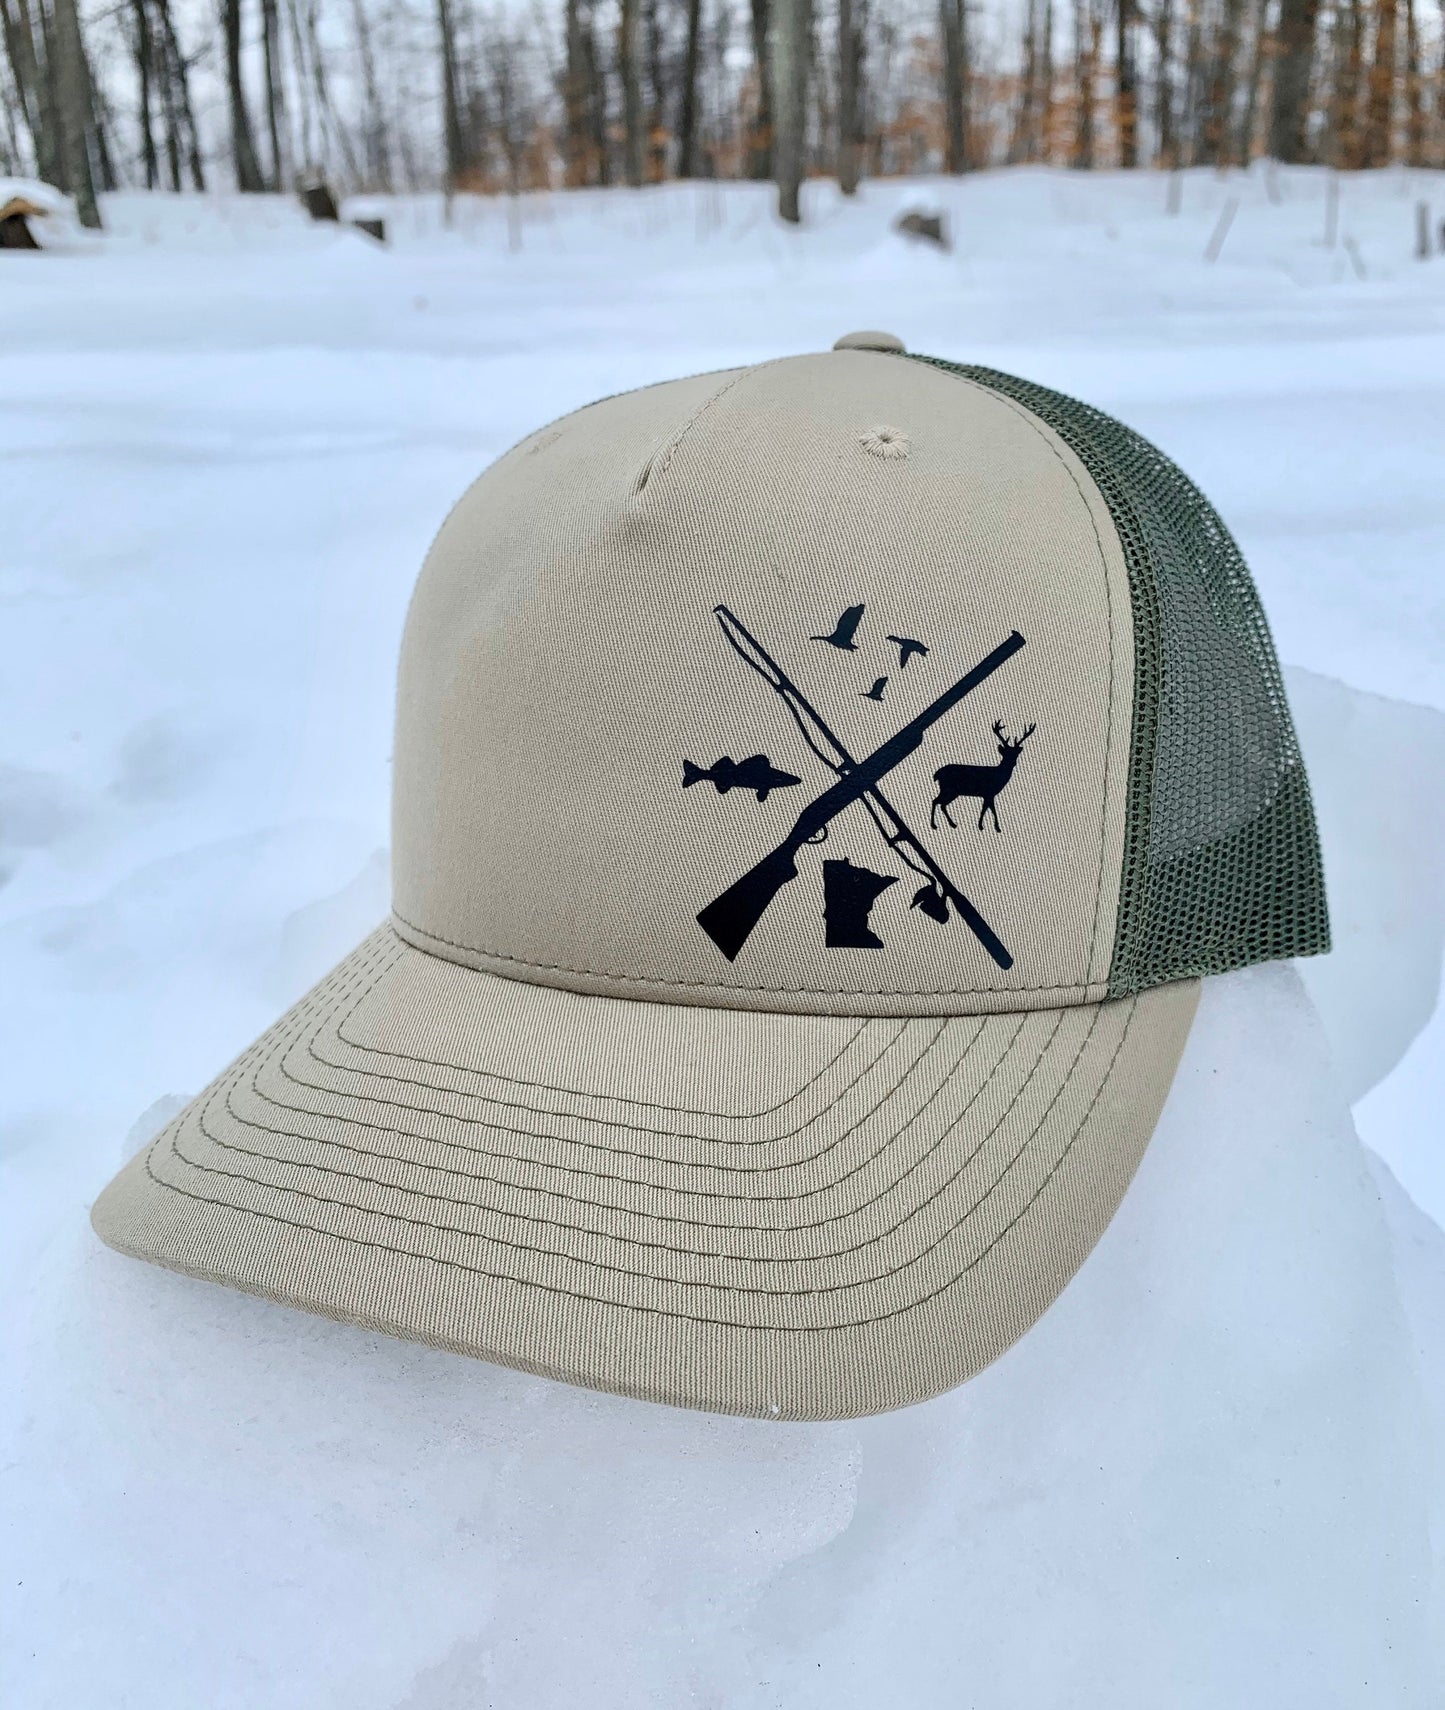 ANY STATE Waterfowl/Walleye/Buck Richardson Snapback Adjustable Hat in Pale/Khaki and Loden Mesh Color Deer-Ducks